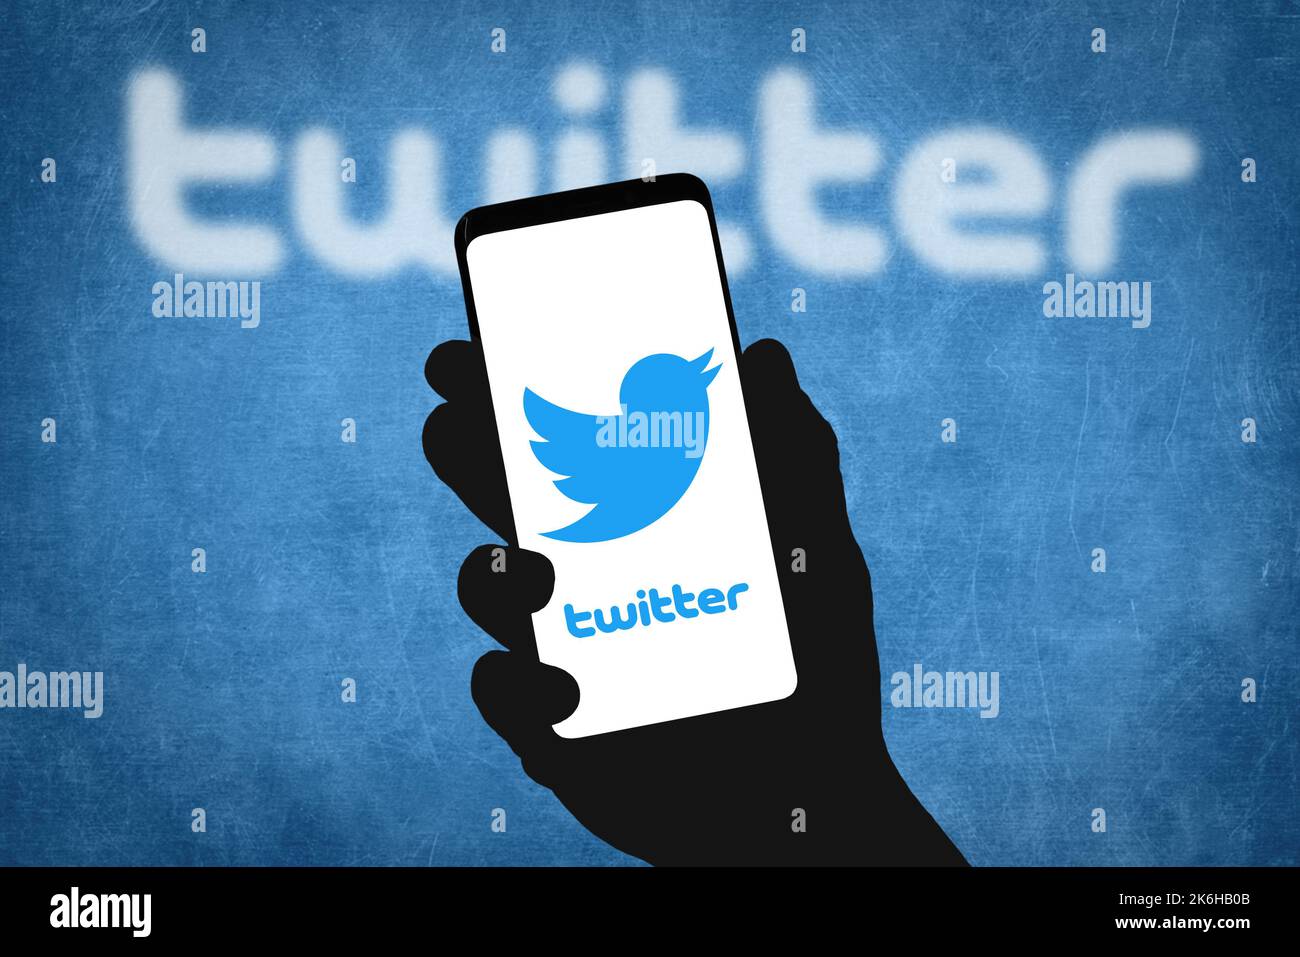 Twitter social networking service Stock Photo